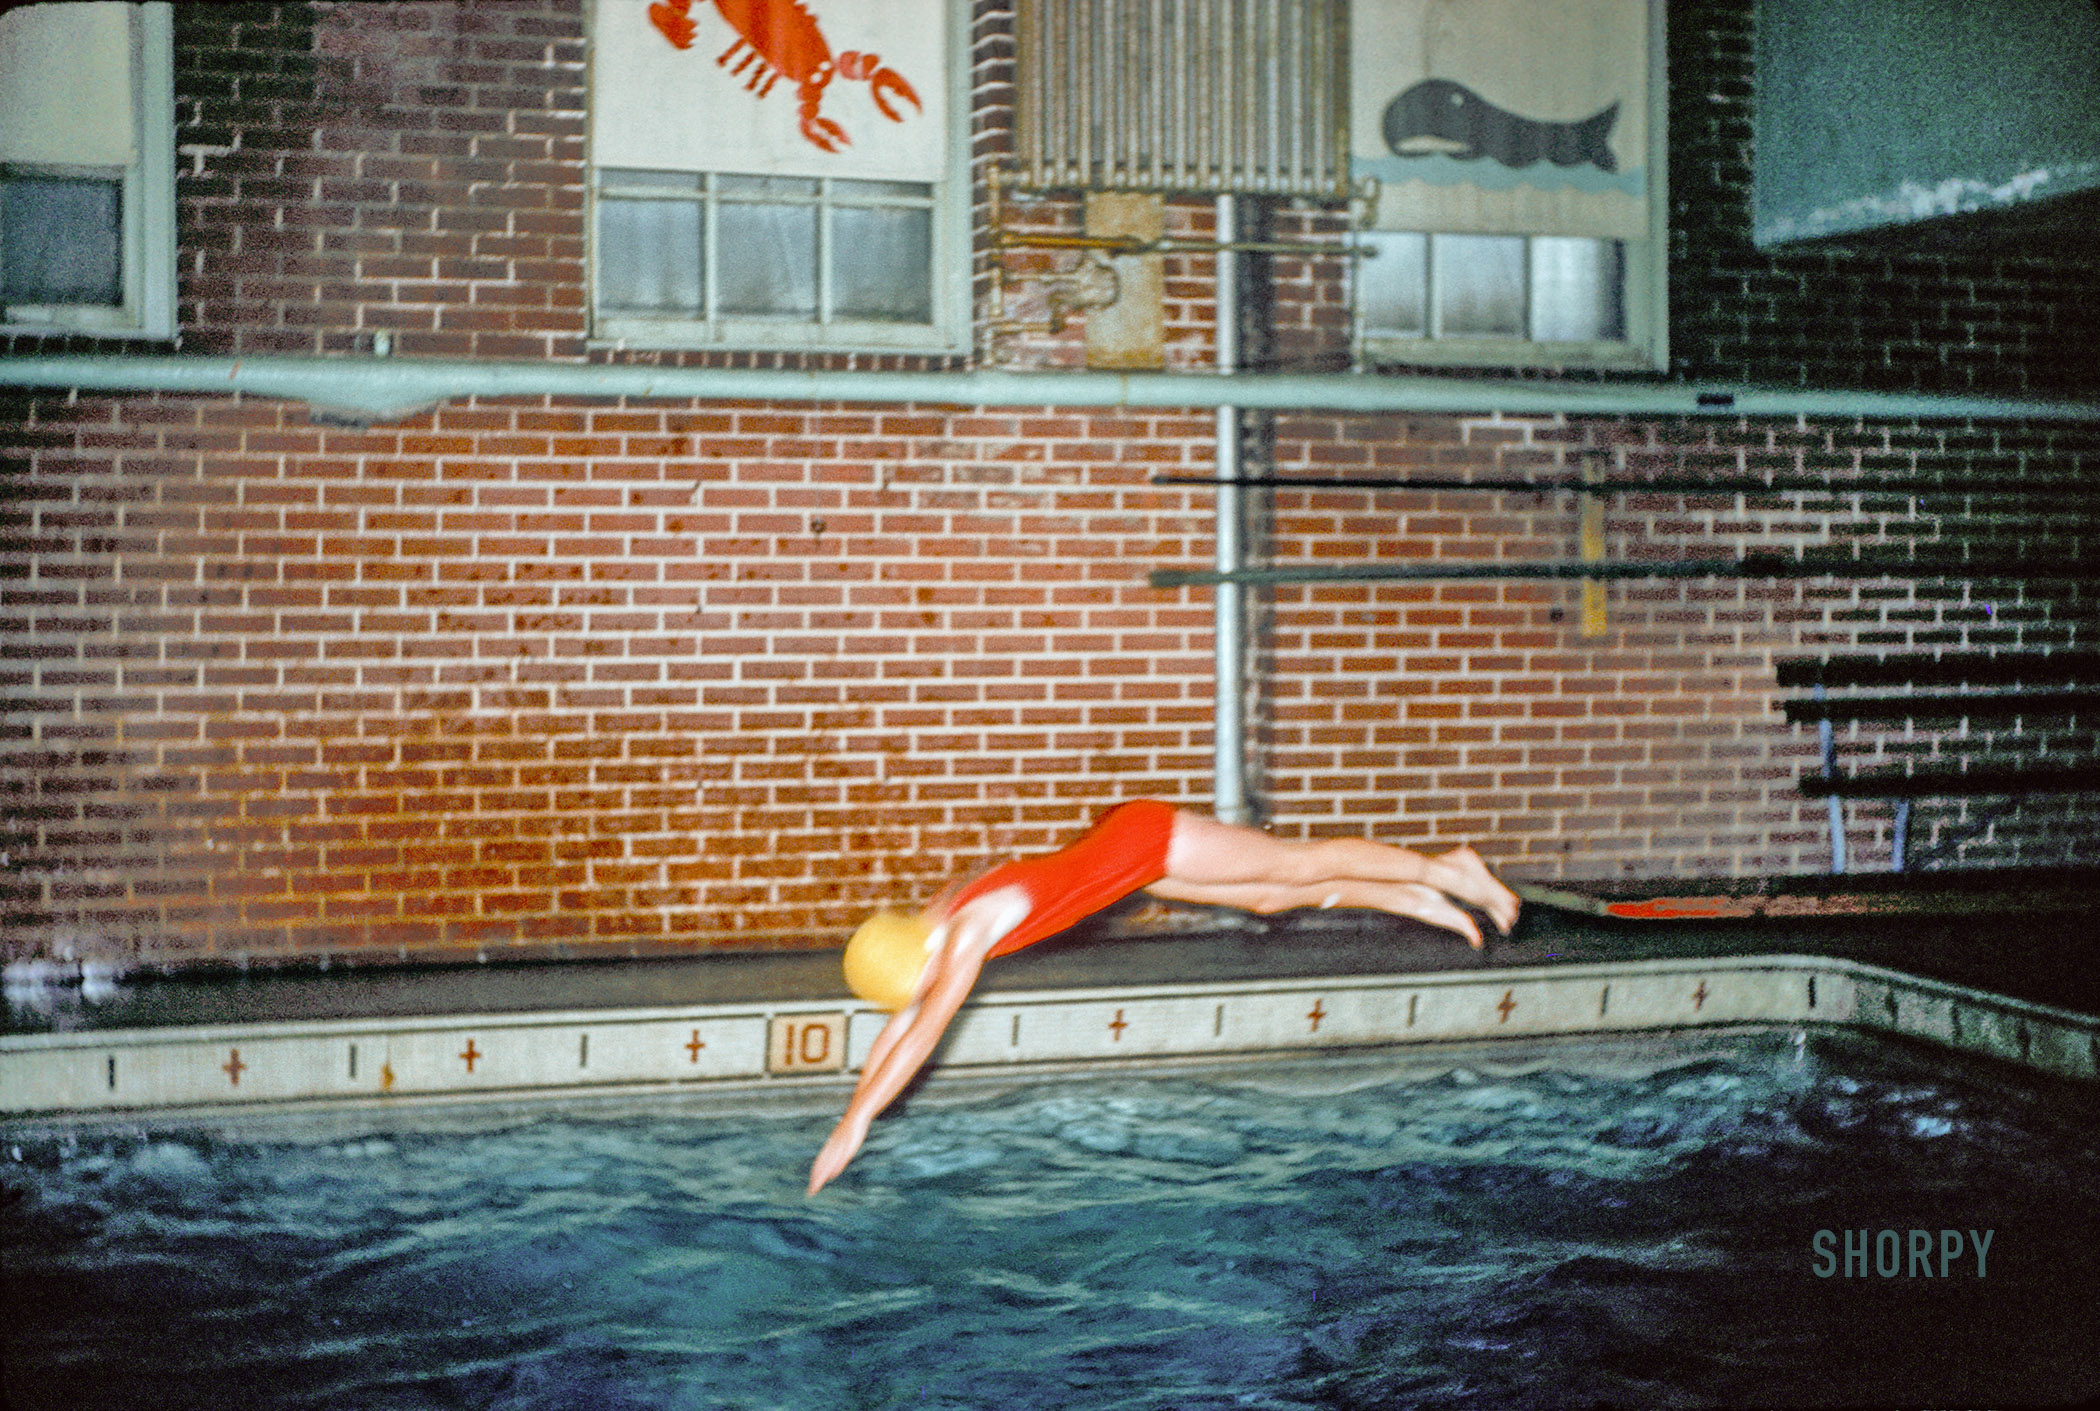 Somewhere in Baltimore. "Janet diving, 1961." 35mm Kodachrome by Janet and Kermy's parents, from a collection of slides found on eBay. View full size.